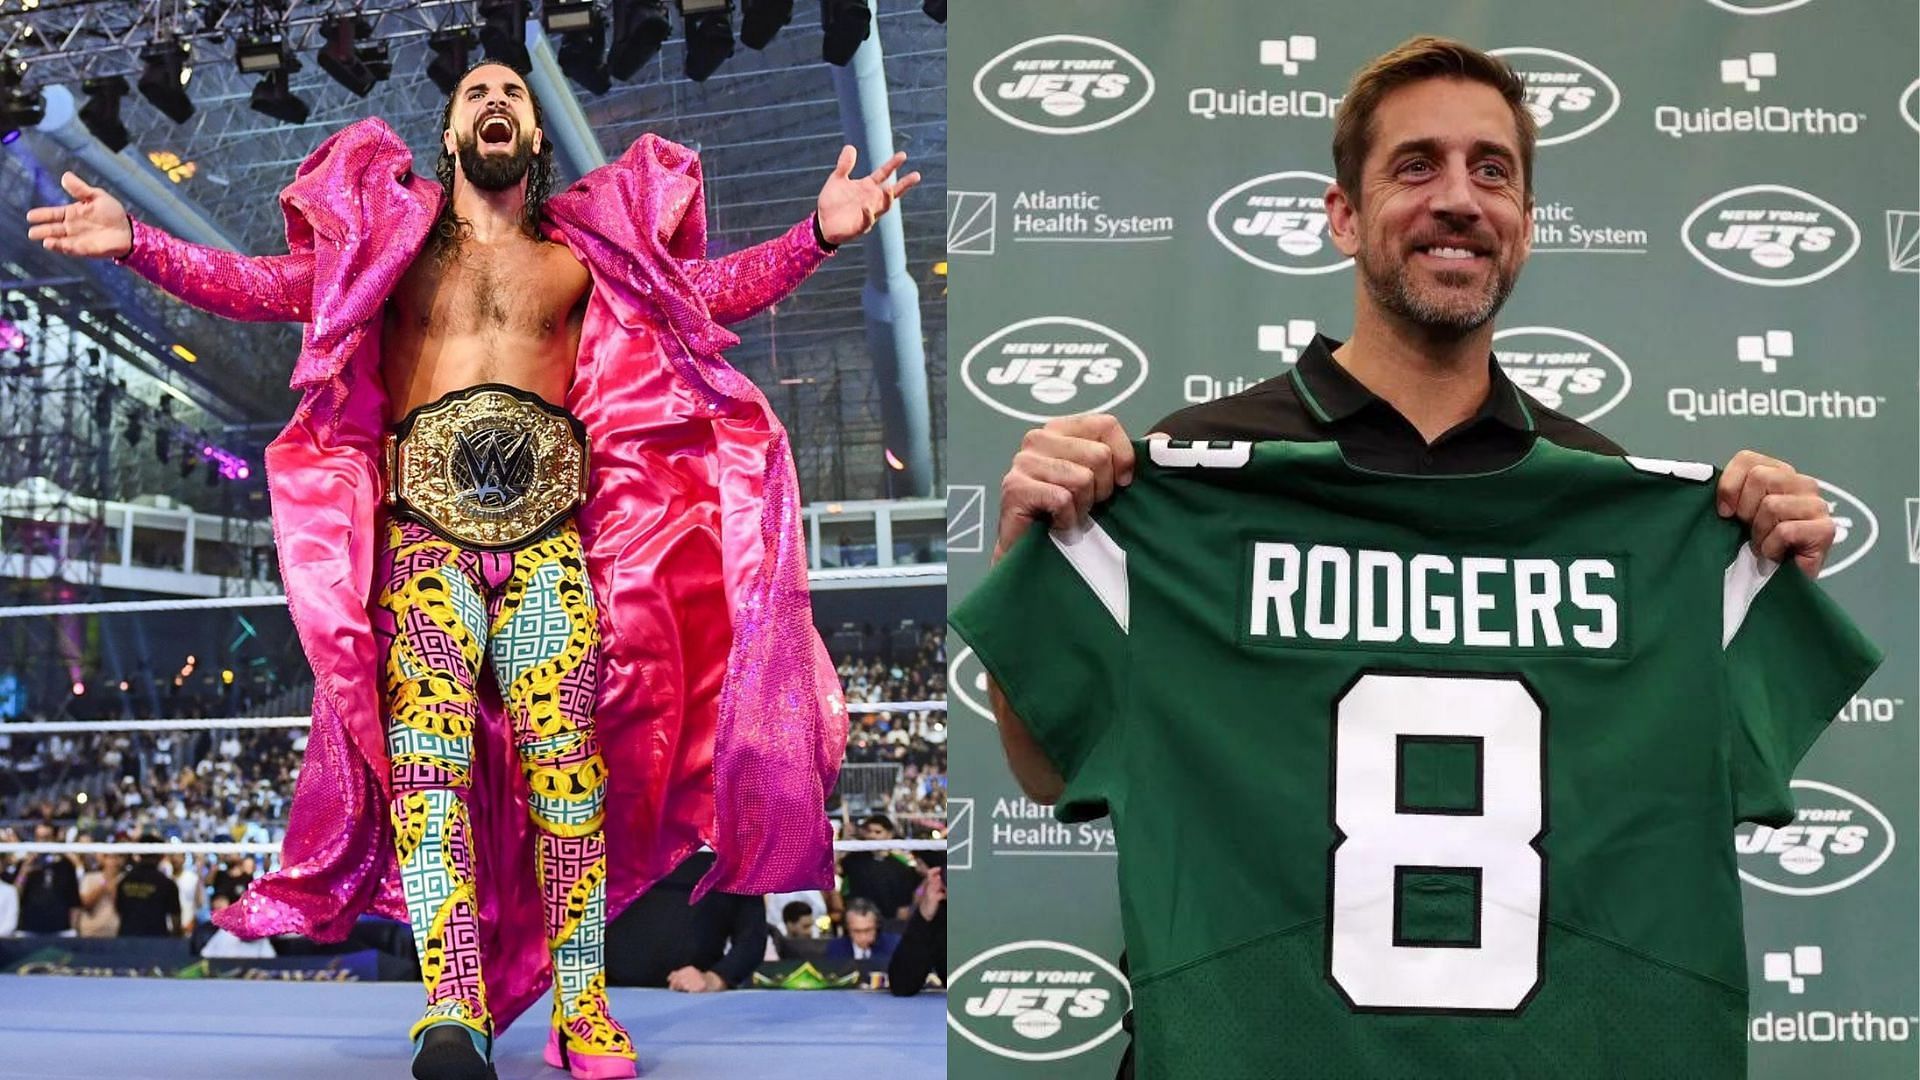 &ldquo;I&rsquo;d love to put a boot in the back of his head&rdquo;: WWE Superstar Seth Rollins makes feelings clear about Aaron Rodgers